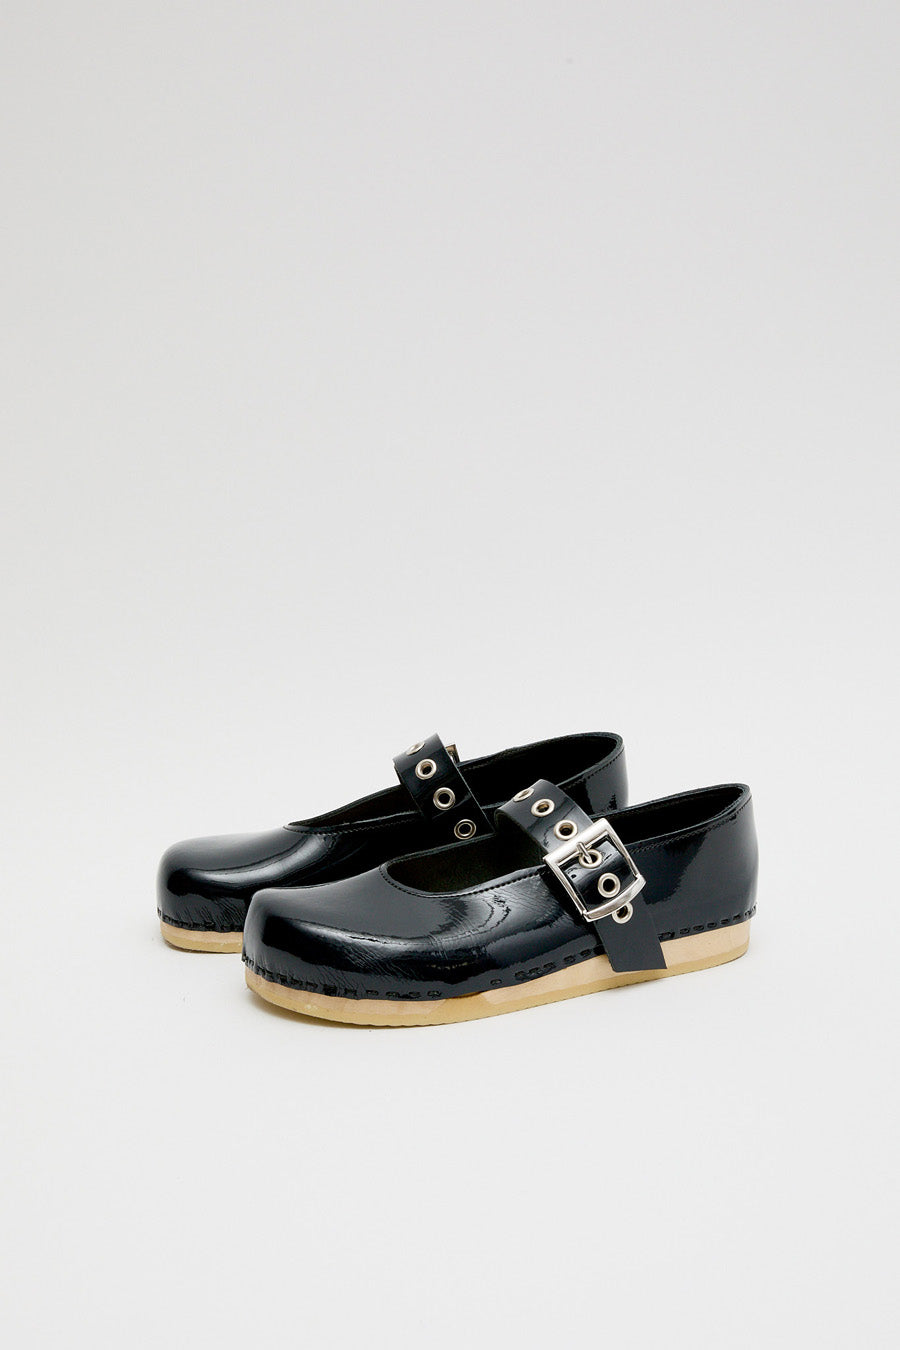 No.6 Maryjane Clog on Flat Bendable Base in Navy Patent